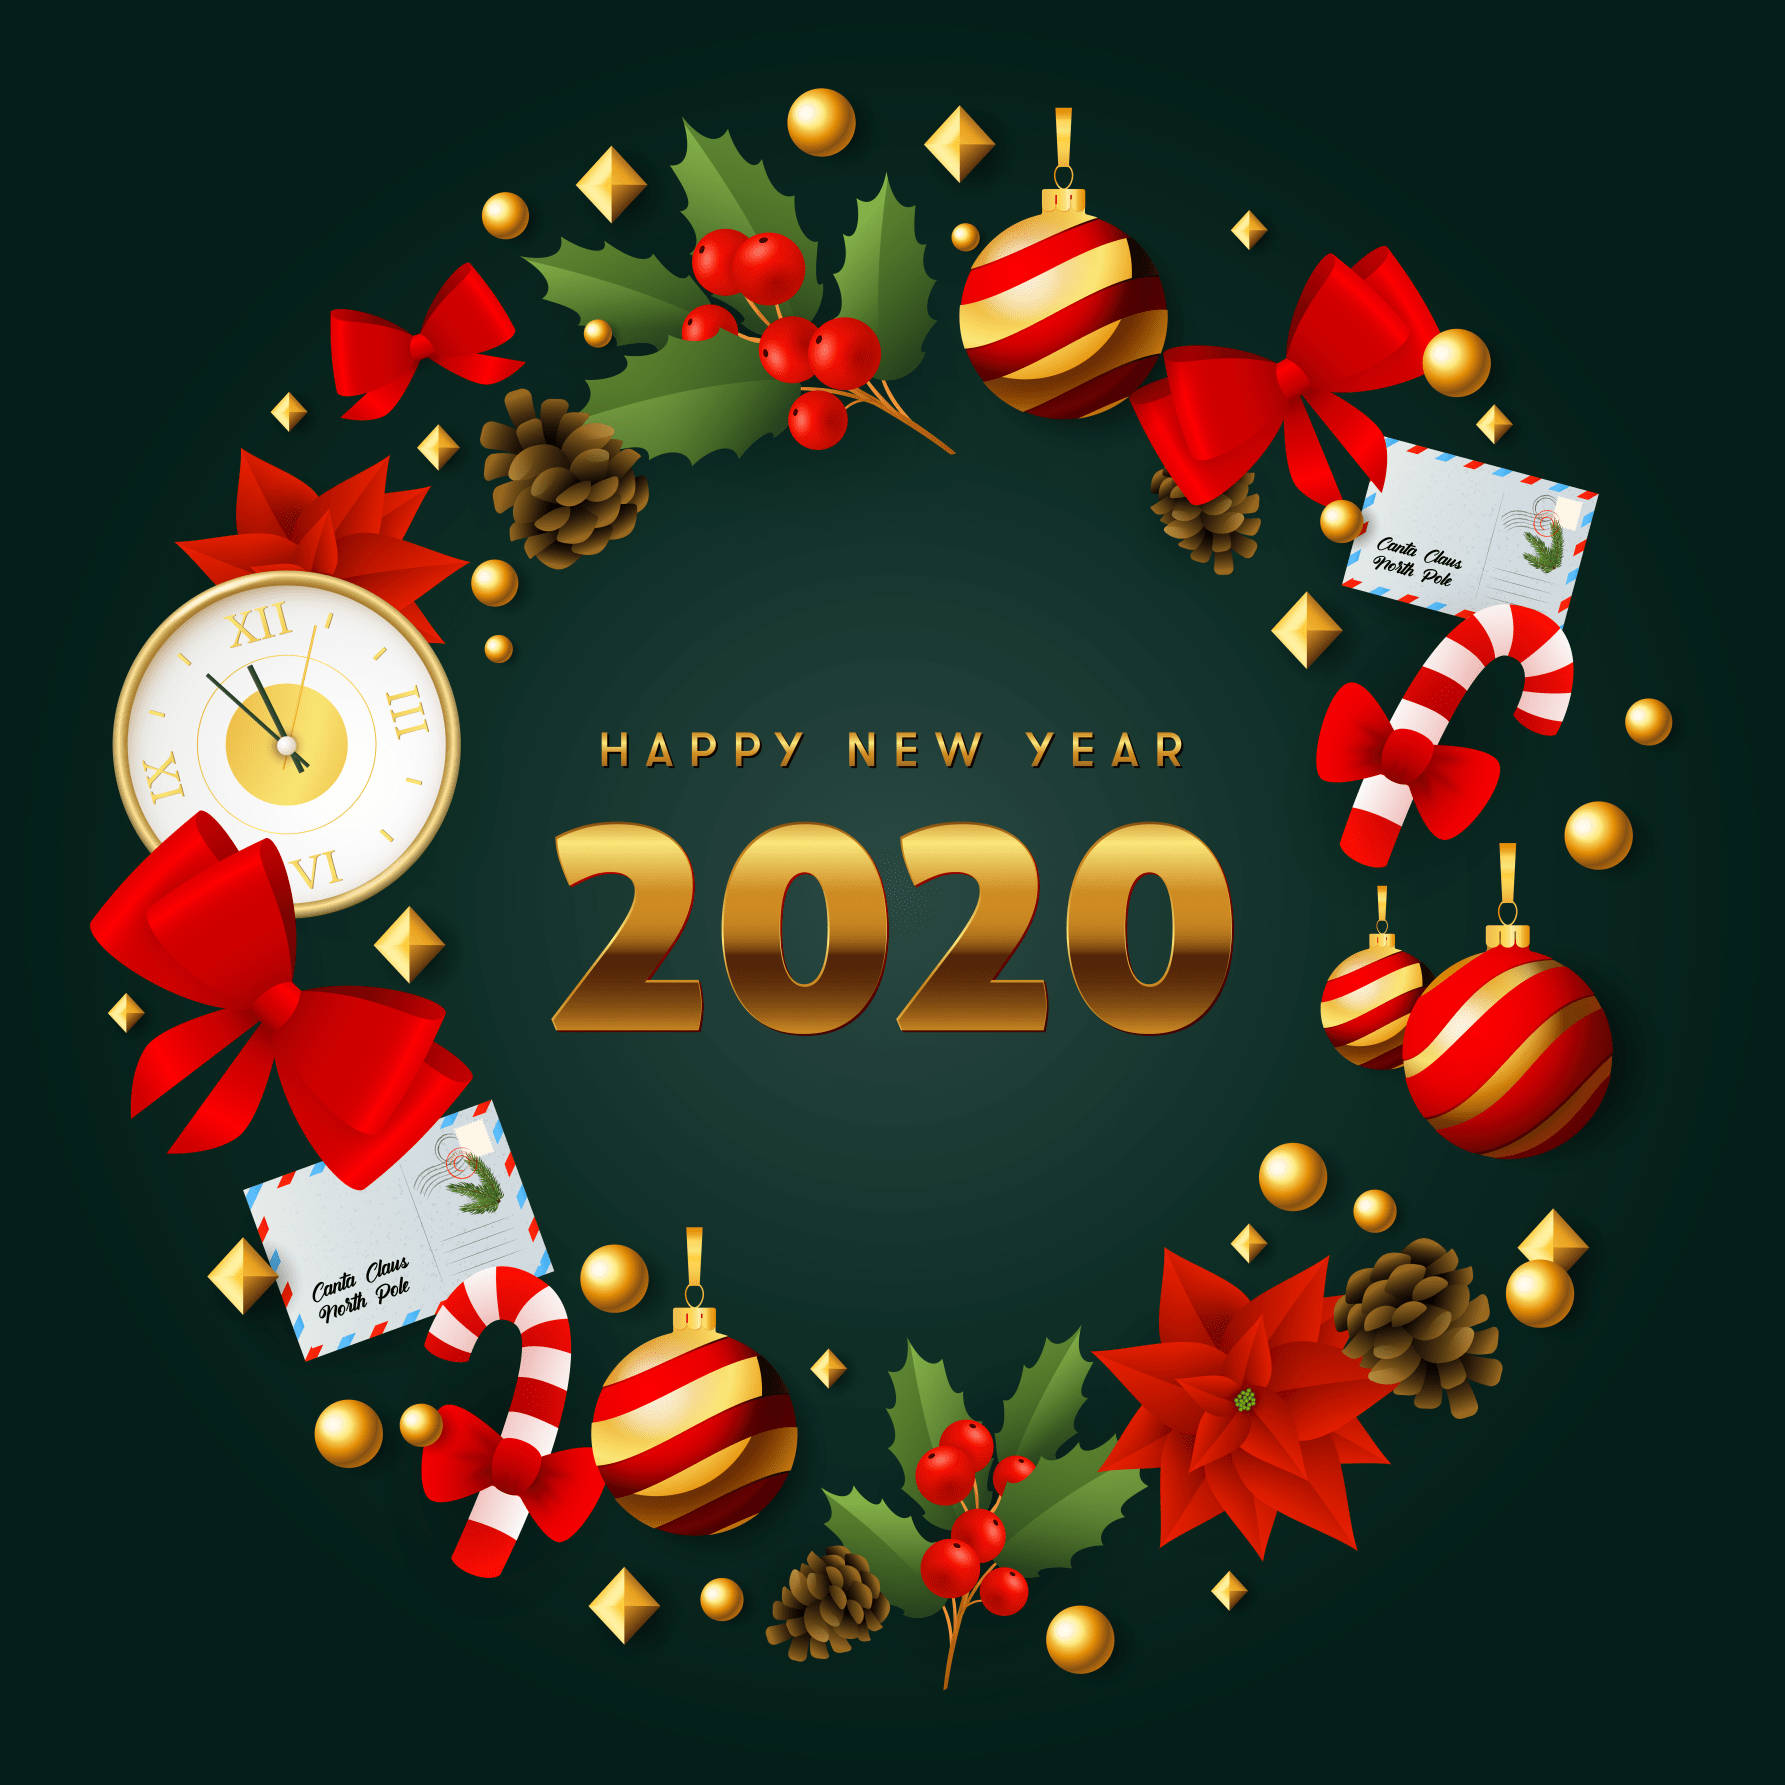 Welcome the fresh start of 2020 with a wish for a Happy New Year! Wallpaper